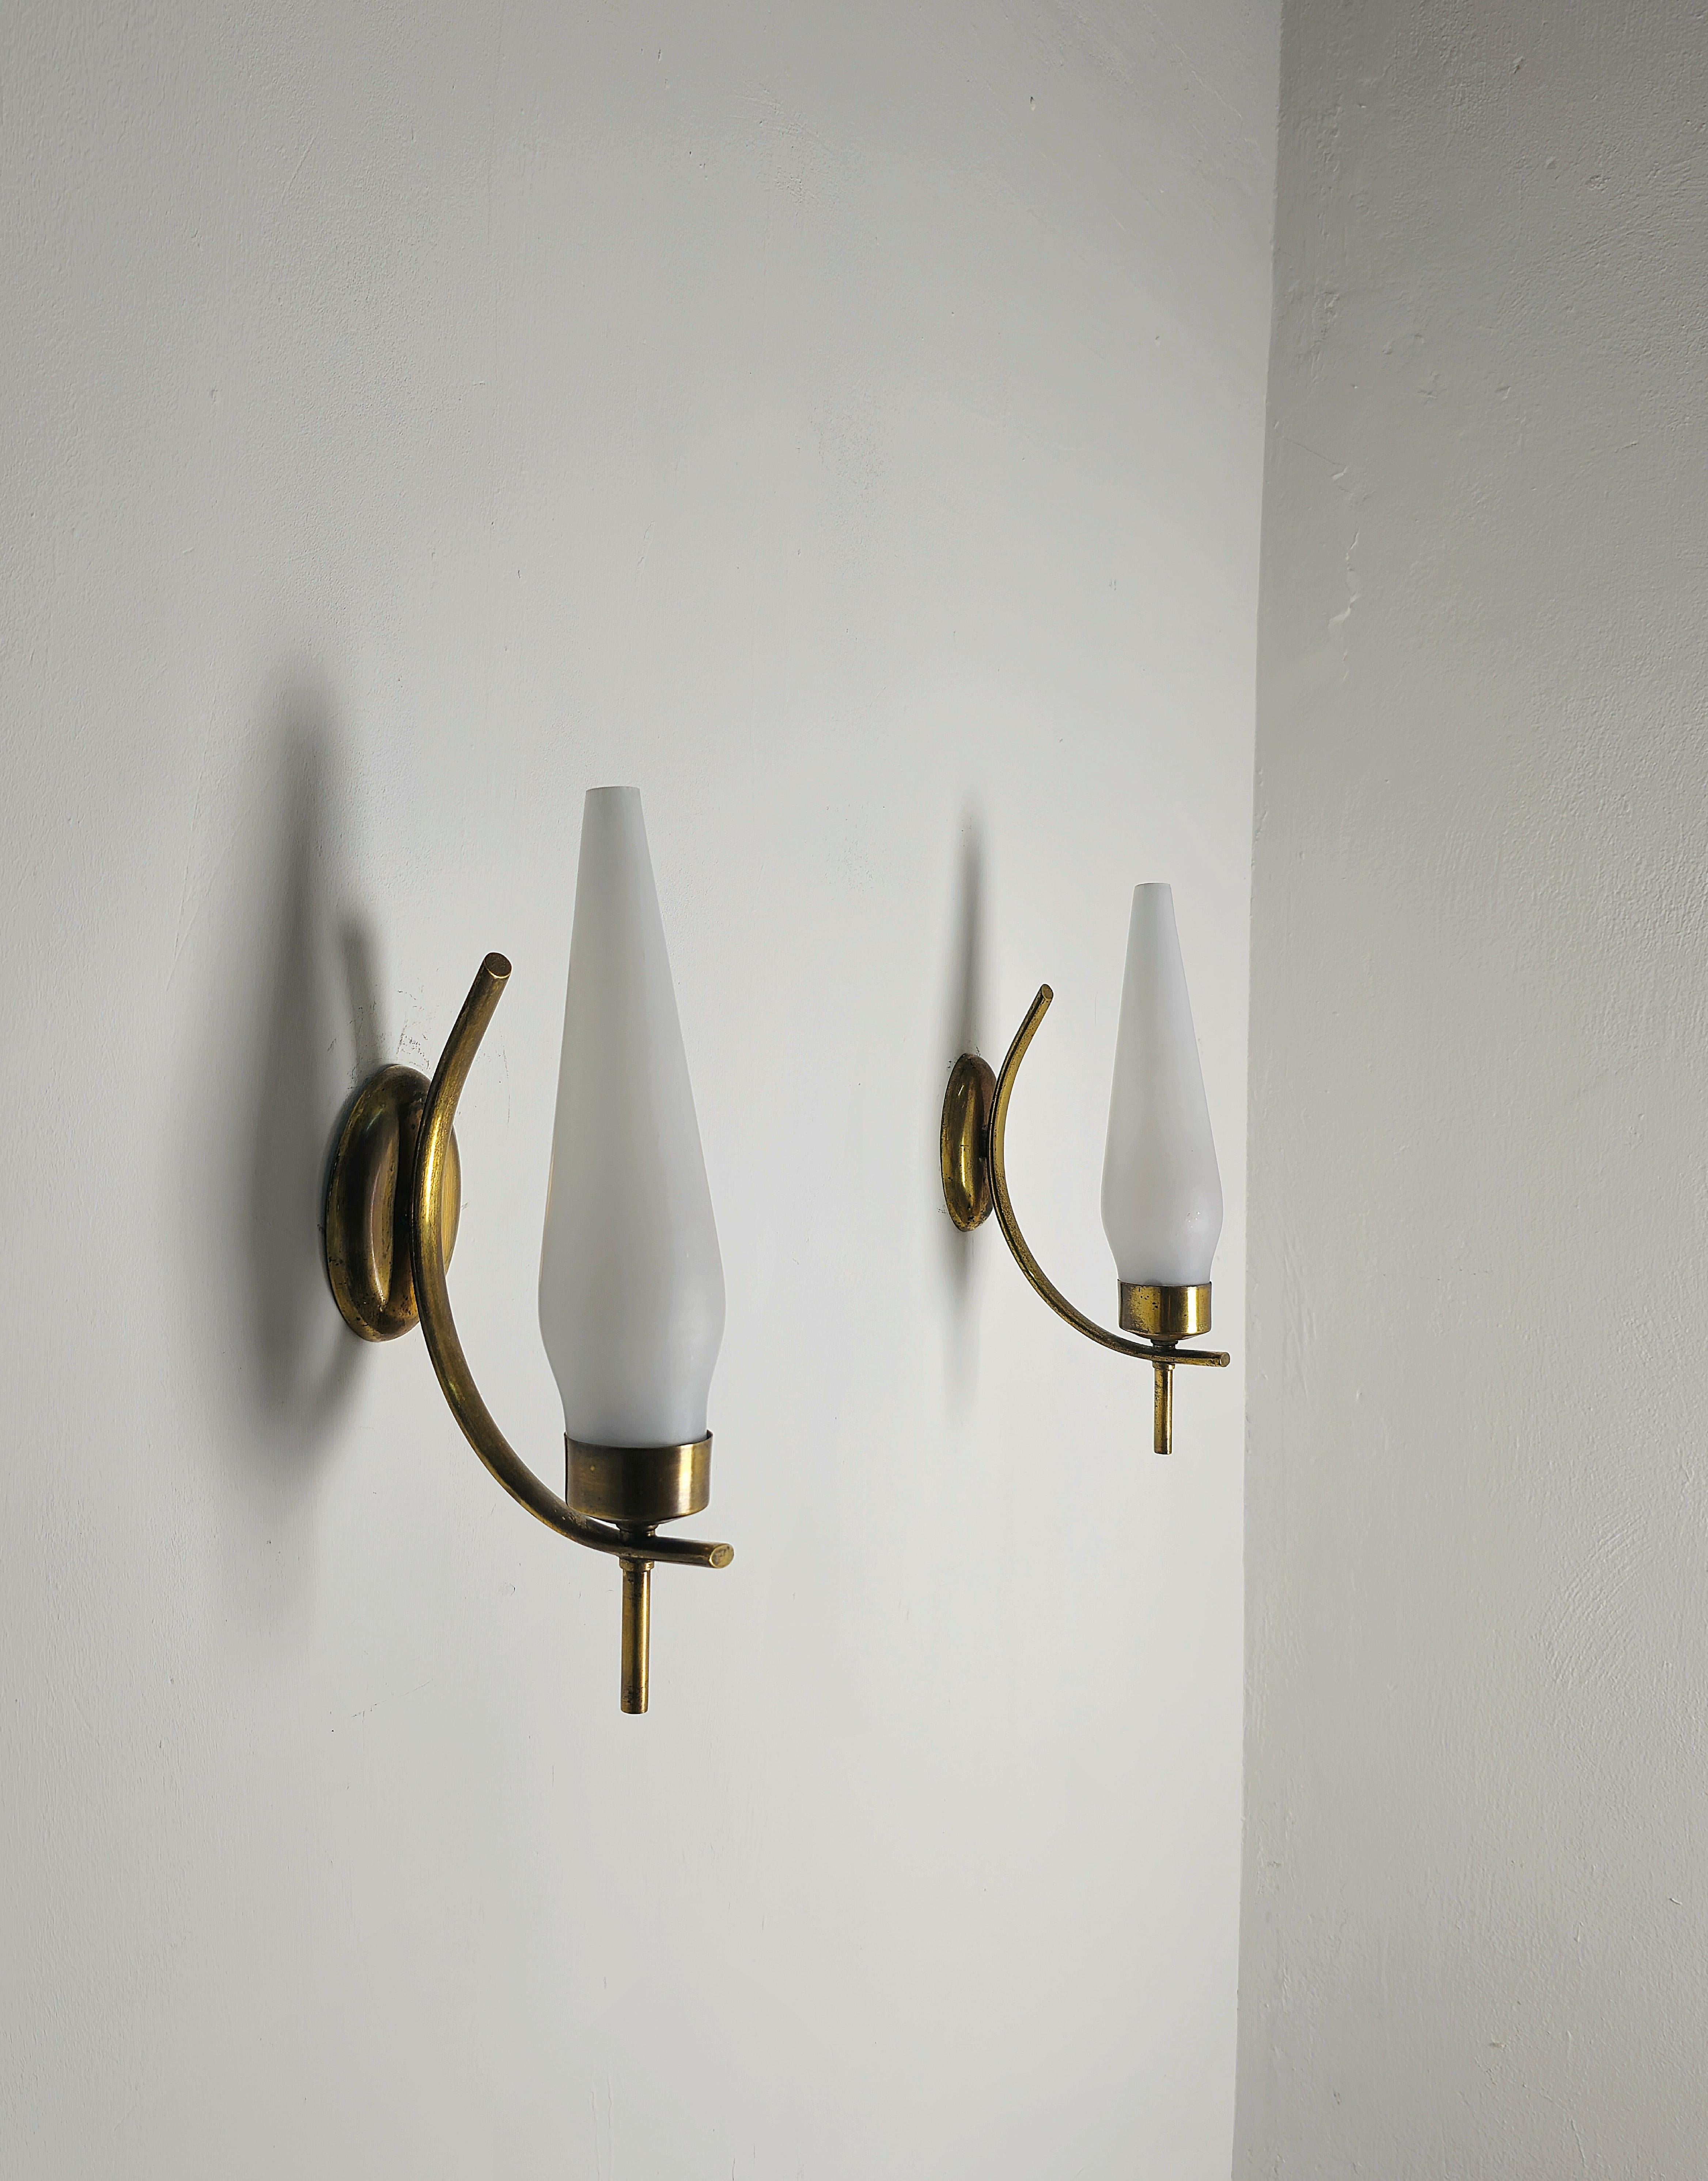 Pair of Wall Lights Sconces Brass Opaline Glass Midcentury Italian Design 1960s  For Sale 2